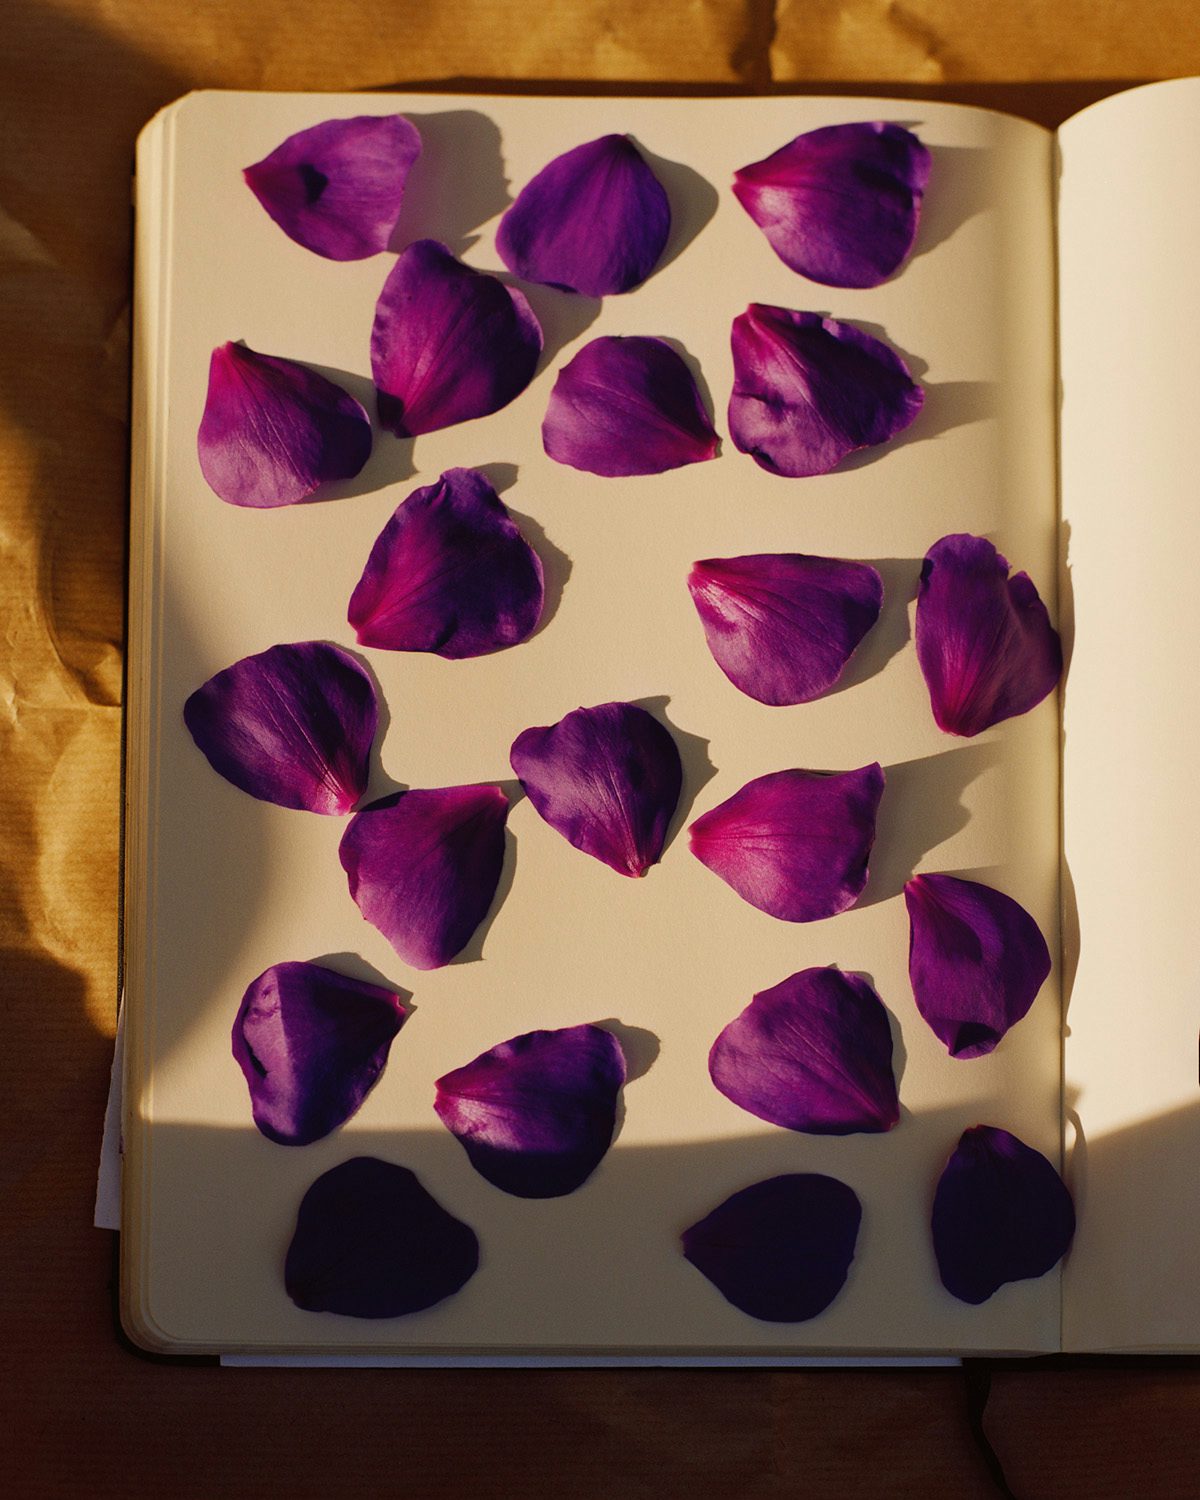 Page of a notebook scattered with purple petals